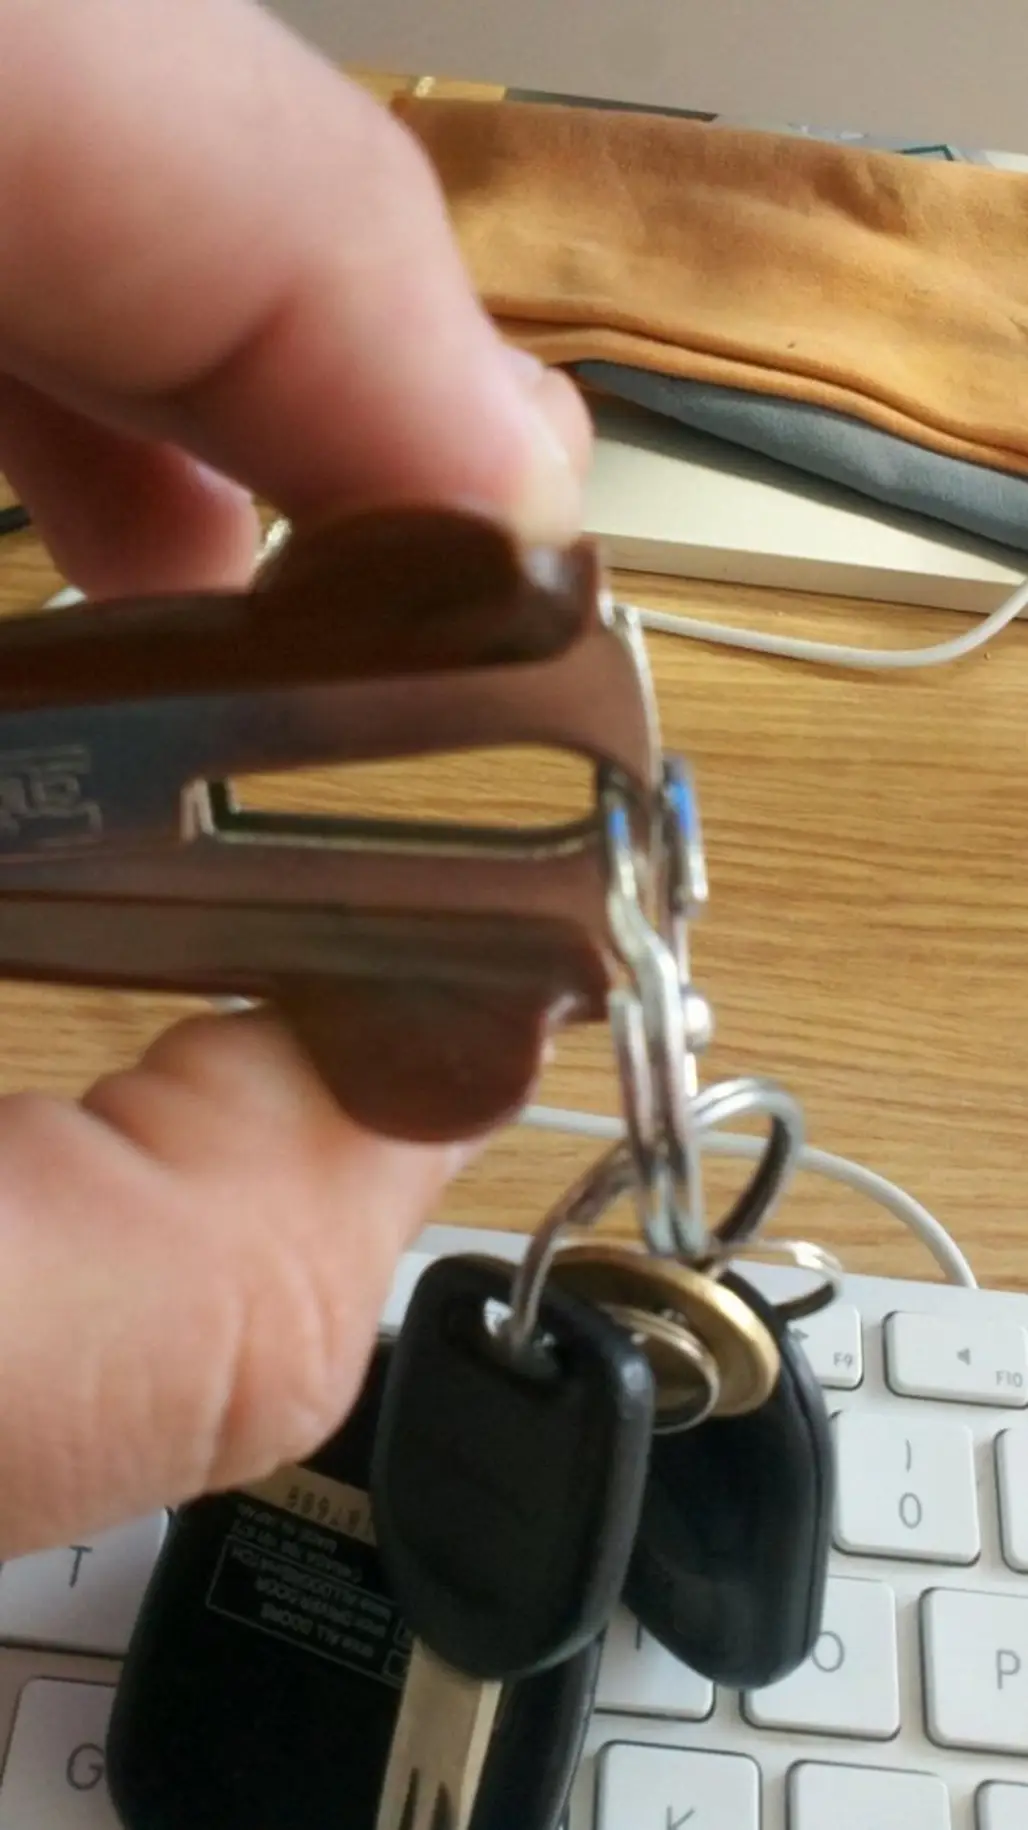 Save Your Fingernails by Using Stapler Removers for Key Chains